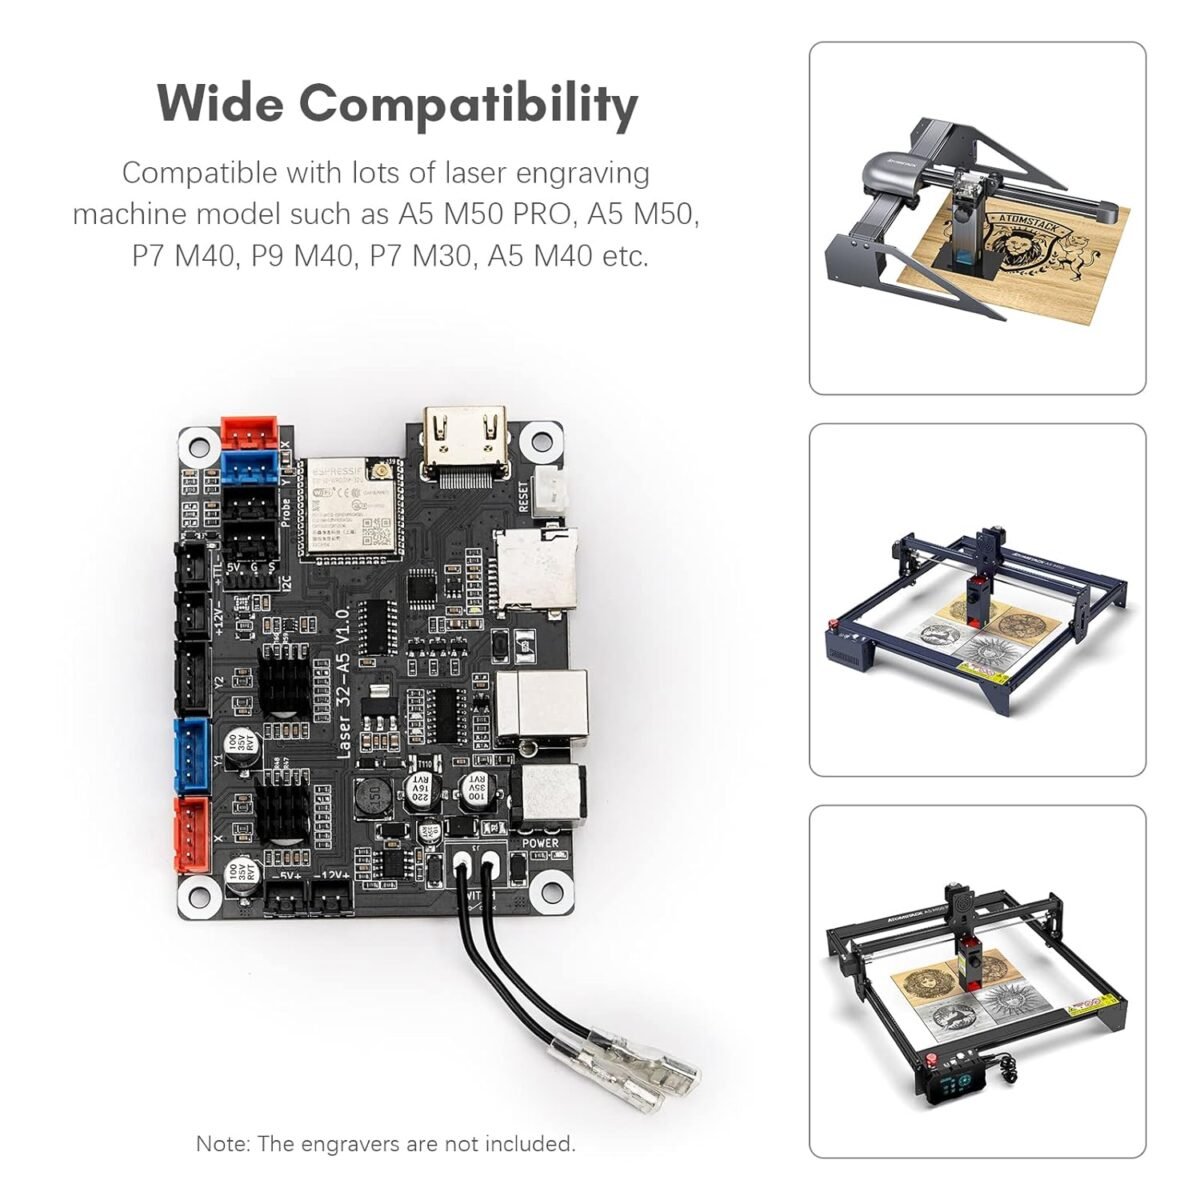 Laser-Engraver-32-bit-Motherboard-Replacement-Used-for-5W-Optical-Power-Engravers-Suitable-for-A5-M50-PROA5-M50P7-M40P9-M40P7-M30A5-M40-3.jpg